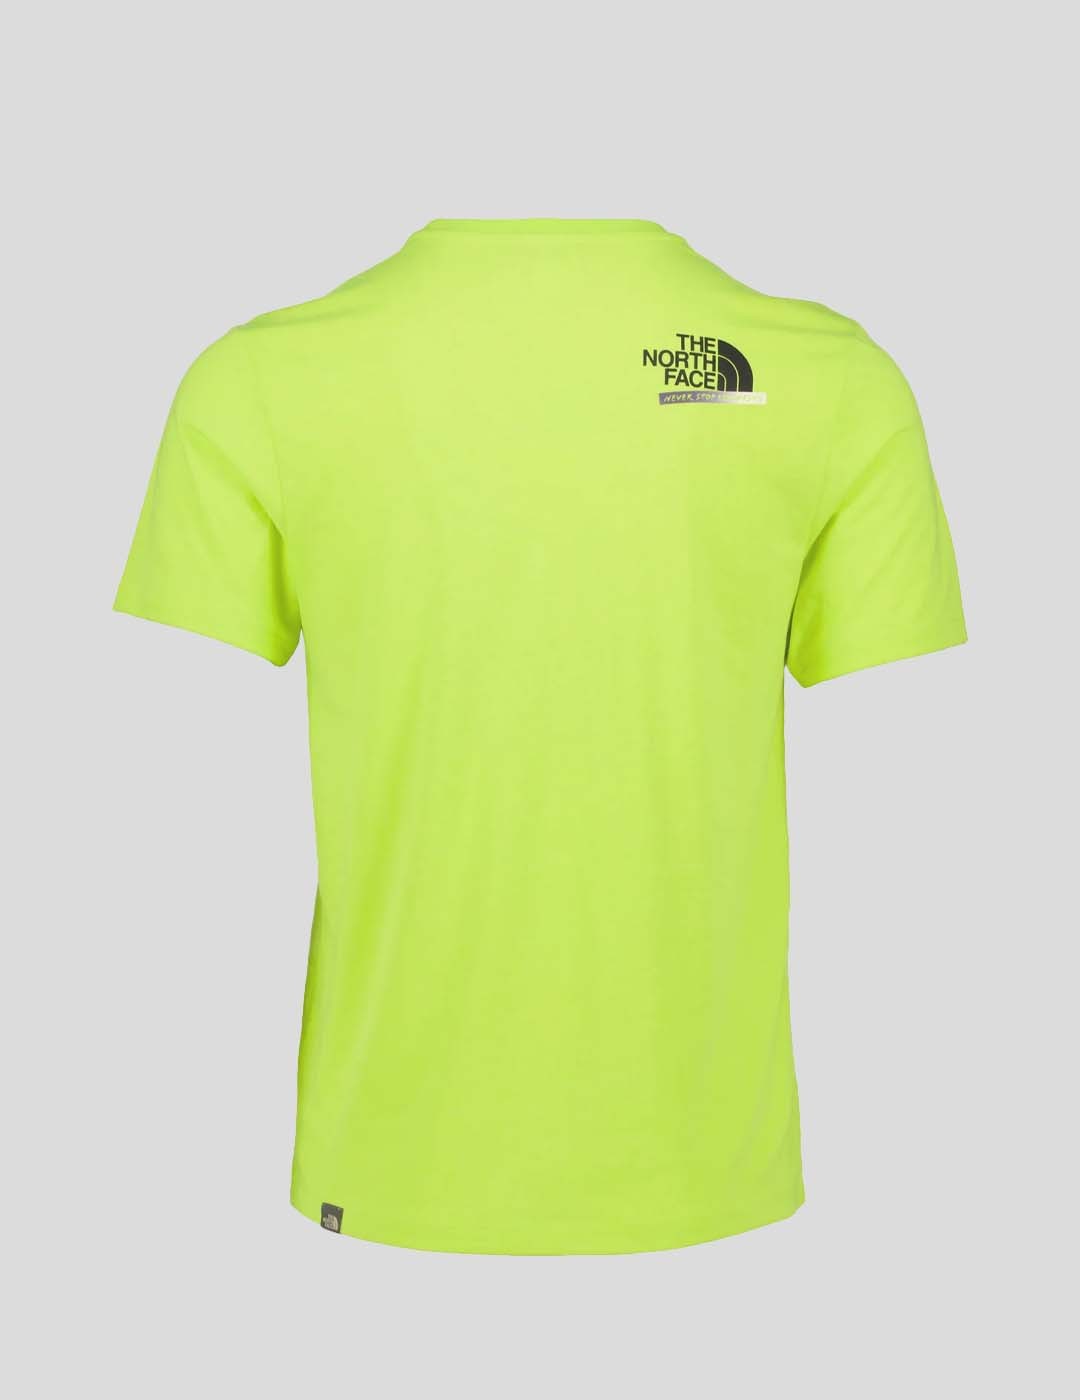 CAMISETA THE NORTH FACE GRAPHIC TEE LED YELLOW